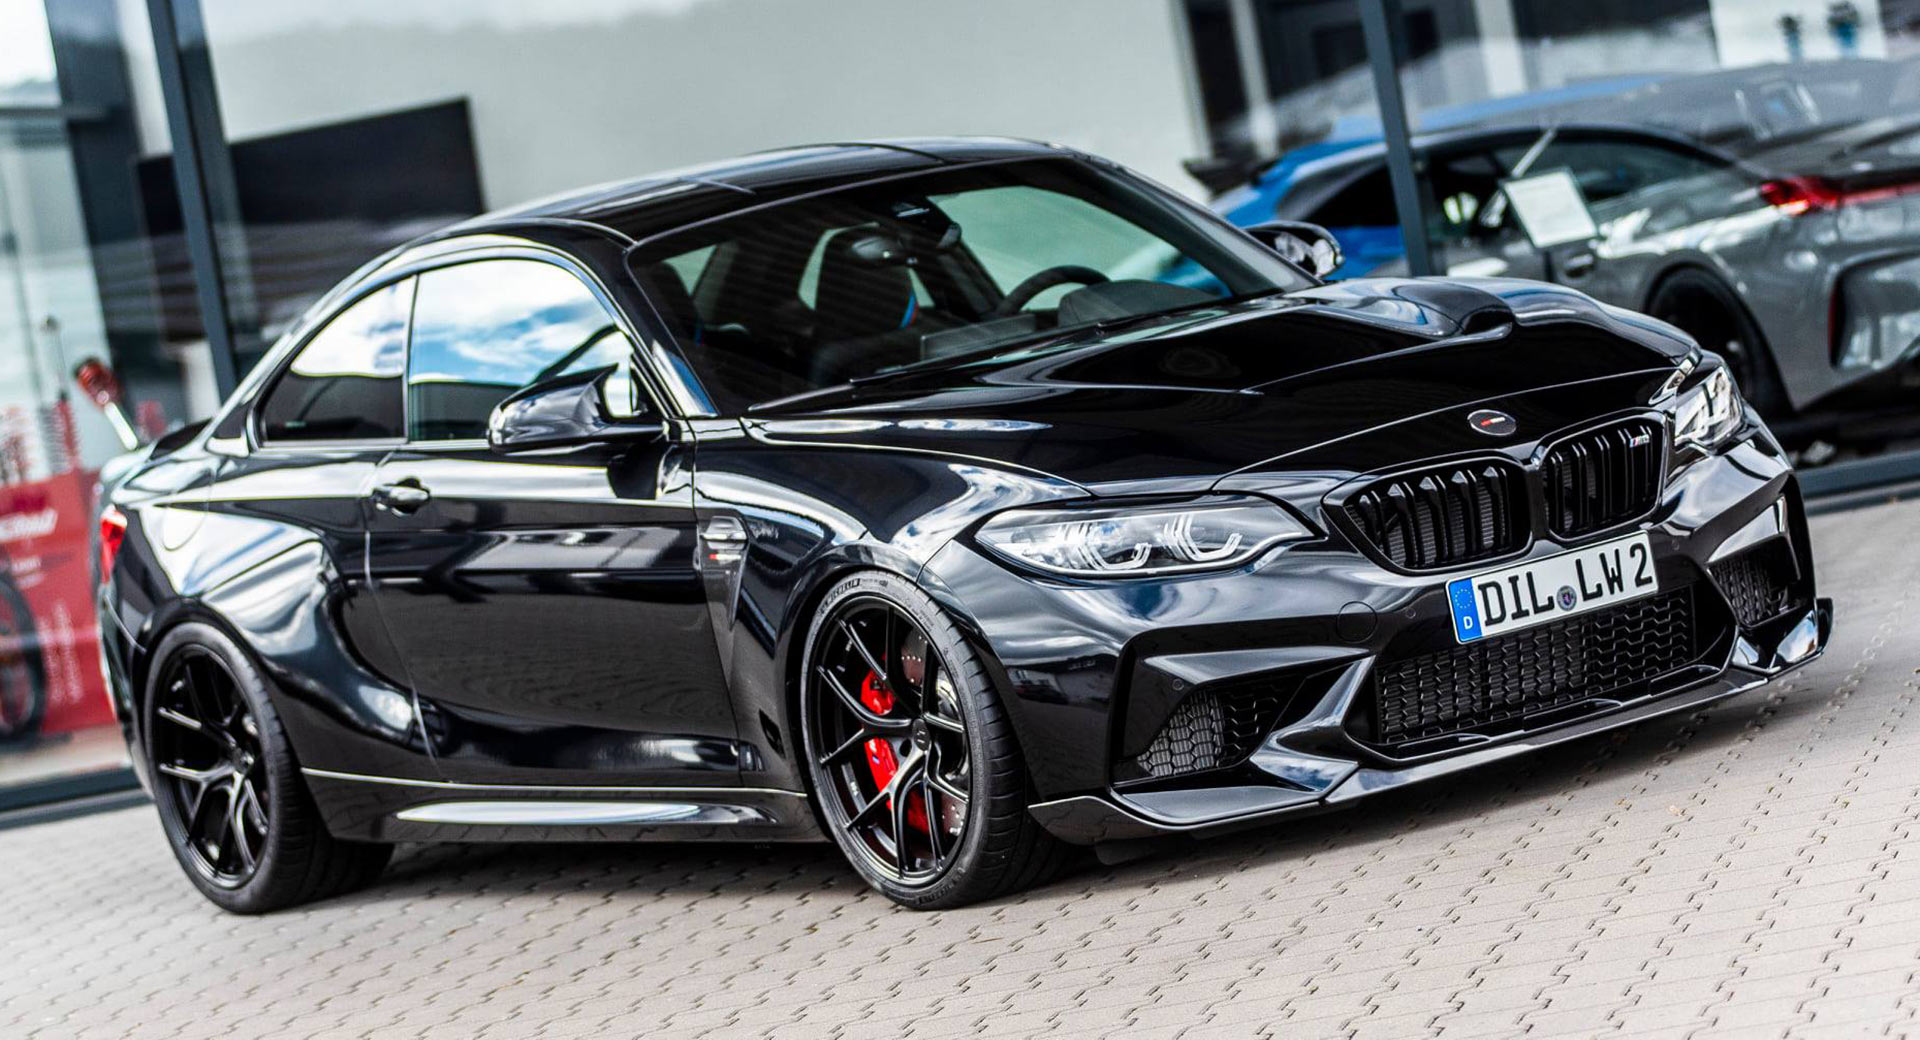 Lightweight Performance Cranks The BMW M2 Competition Up To 730 HP |  Carscoops